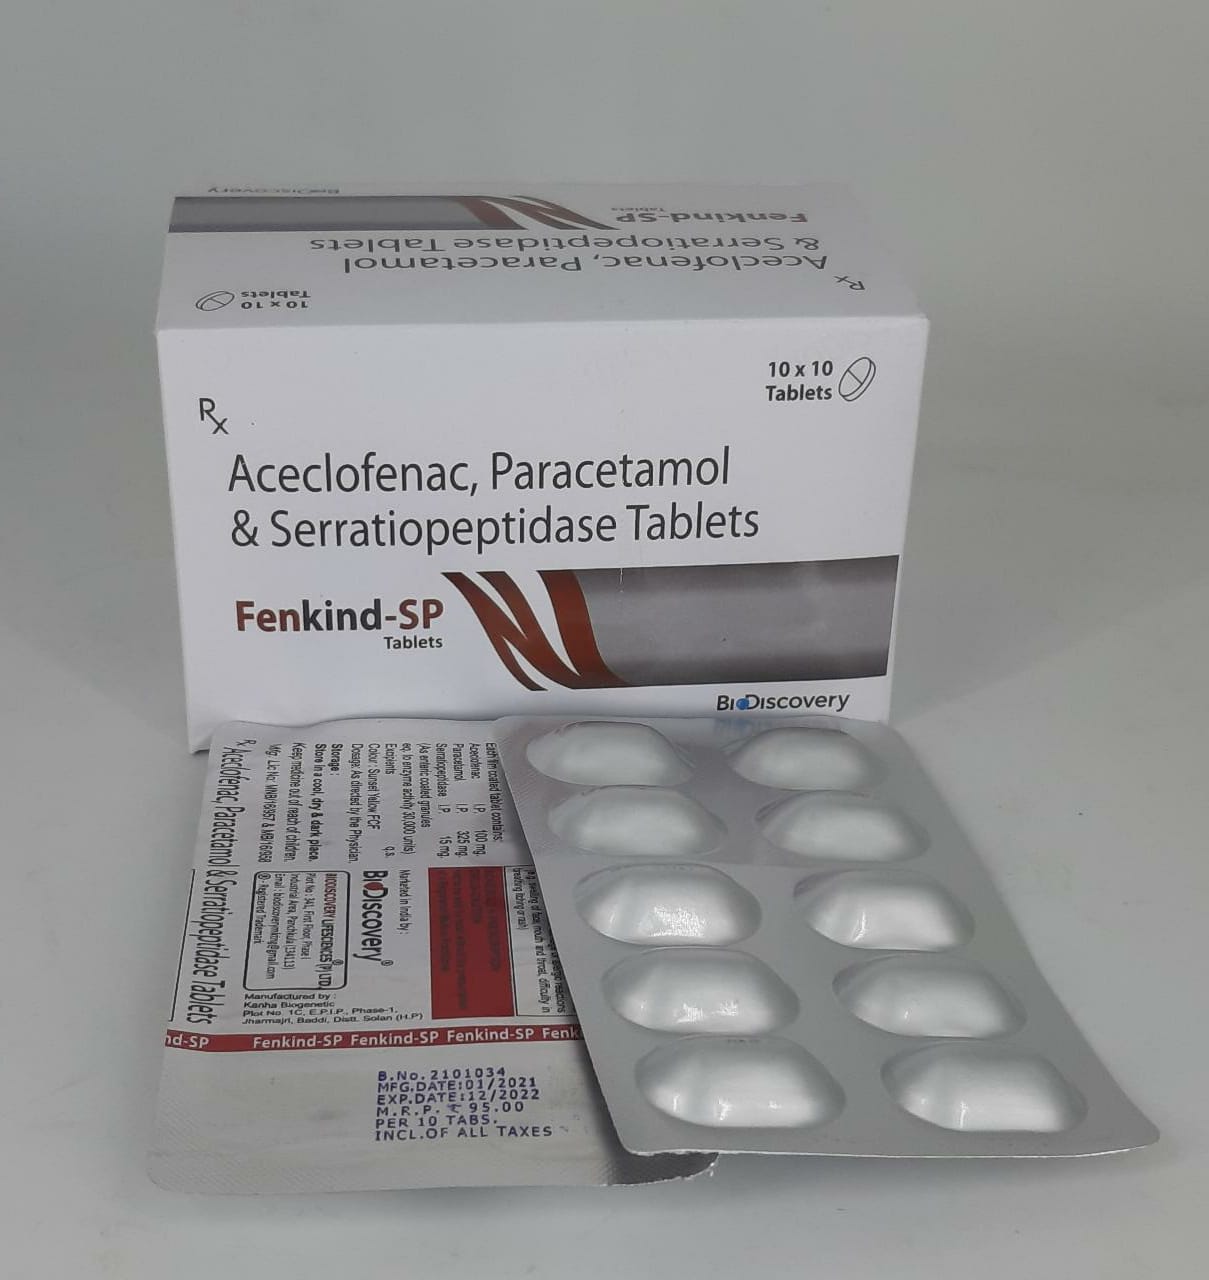 Product Name: Fenkind SP, Compositions of Aceclofenac, Paracetamol & Serratiopeptidase Tablets are Aceclofenac, Paracetamol & Serratiopeptidase Tablets - Biodiscovery Lifesciences Pvt Ltd